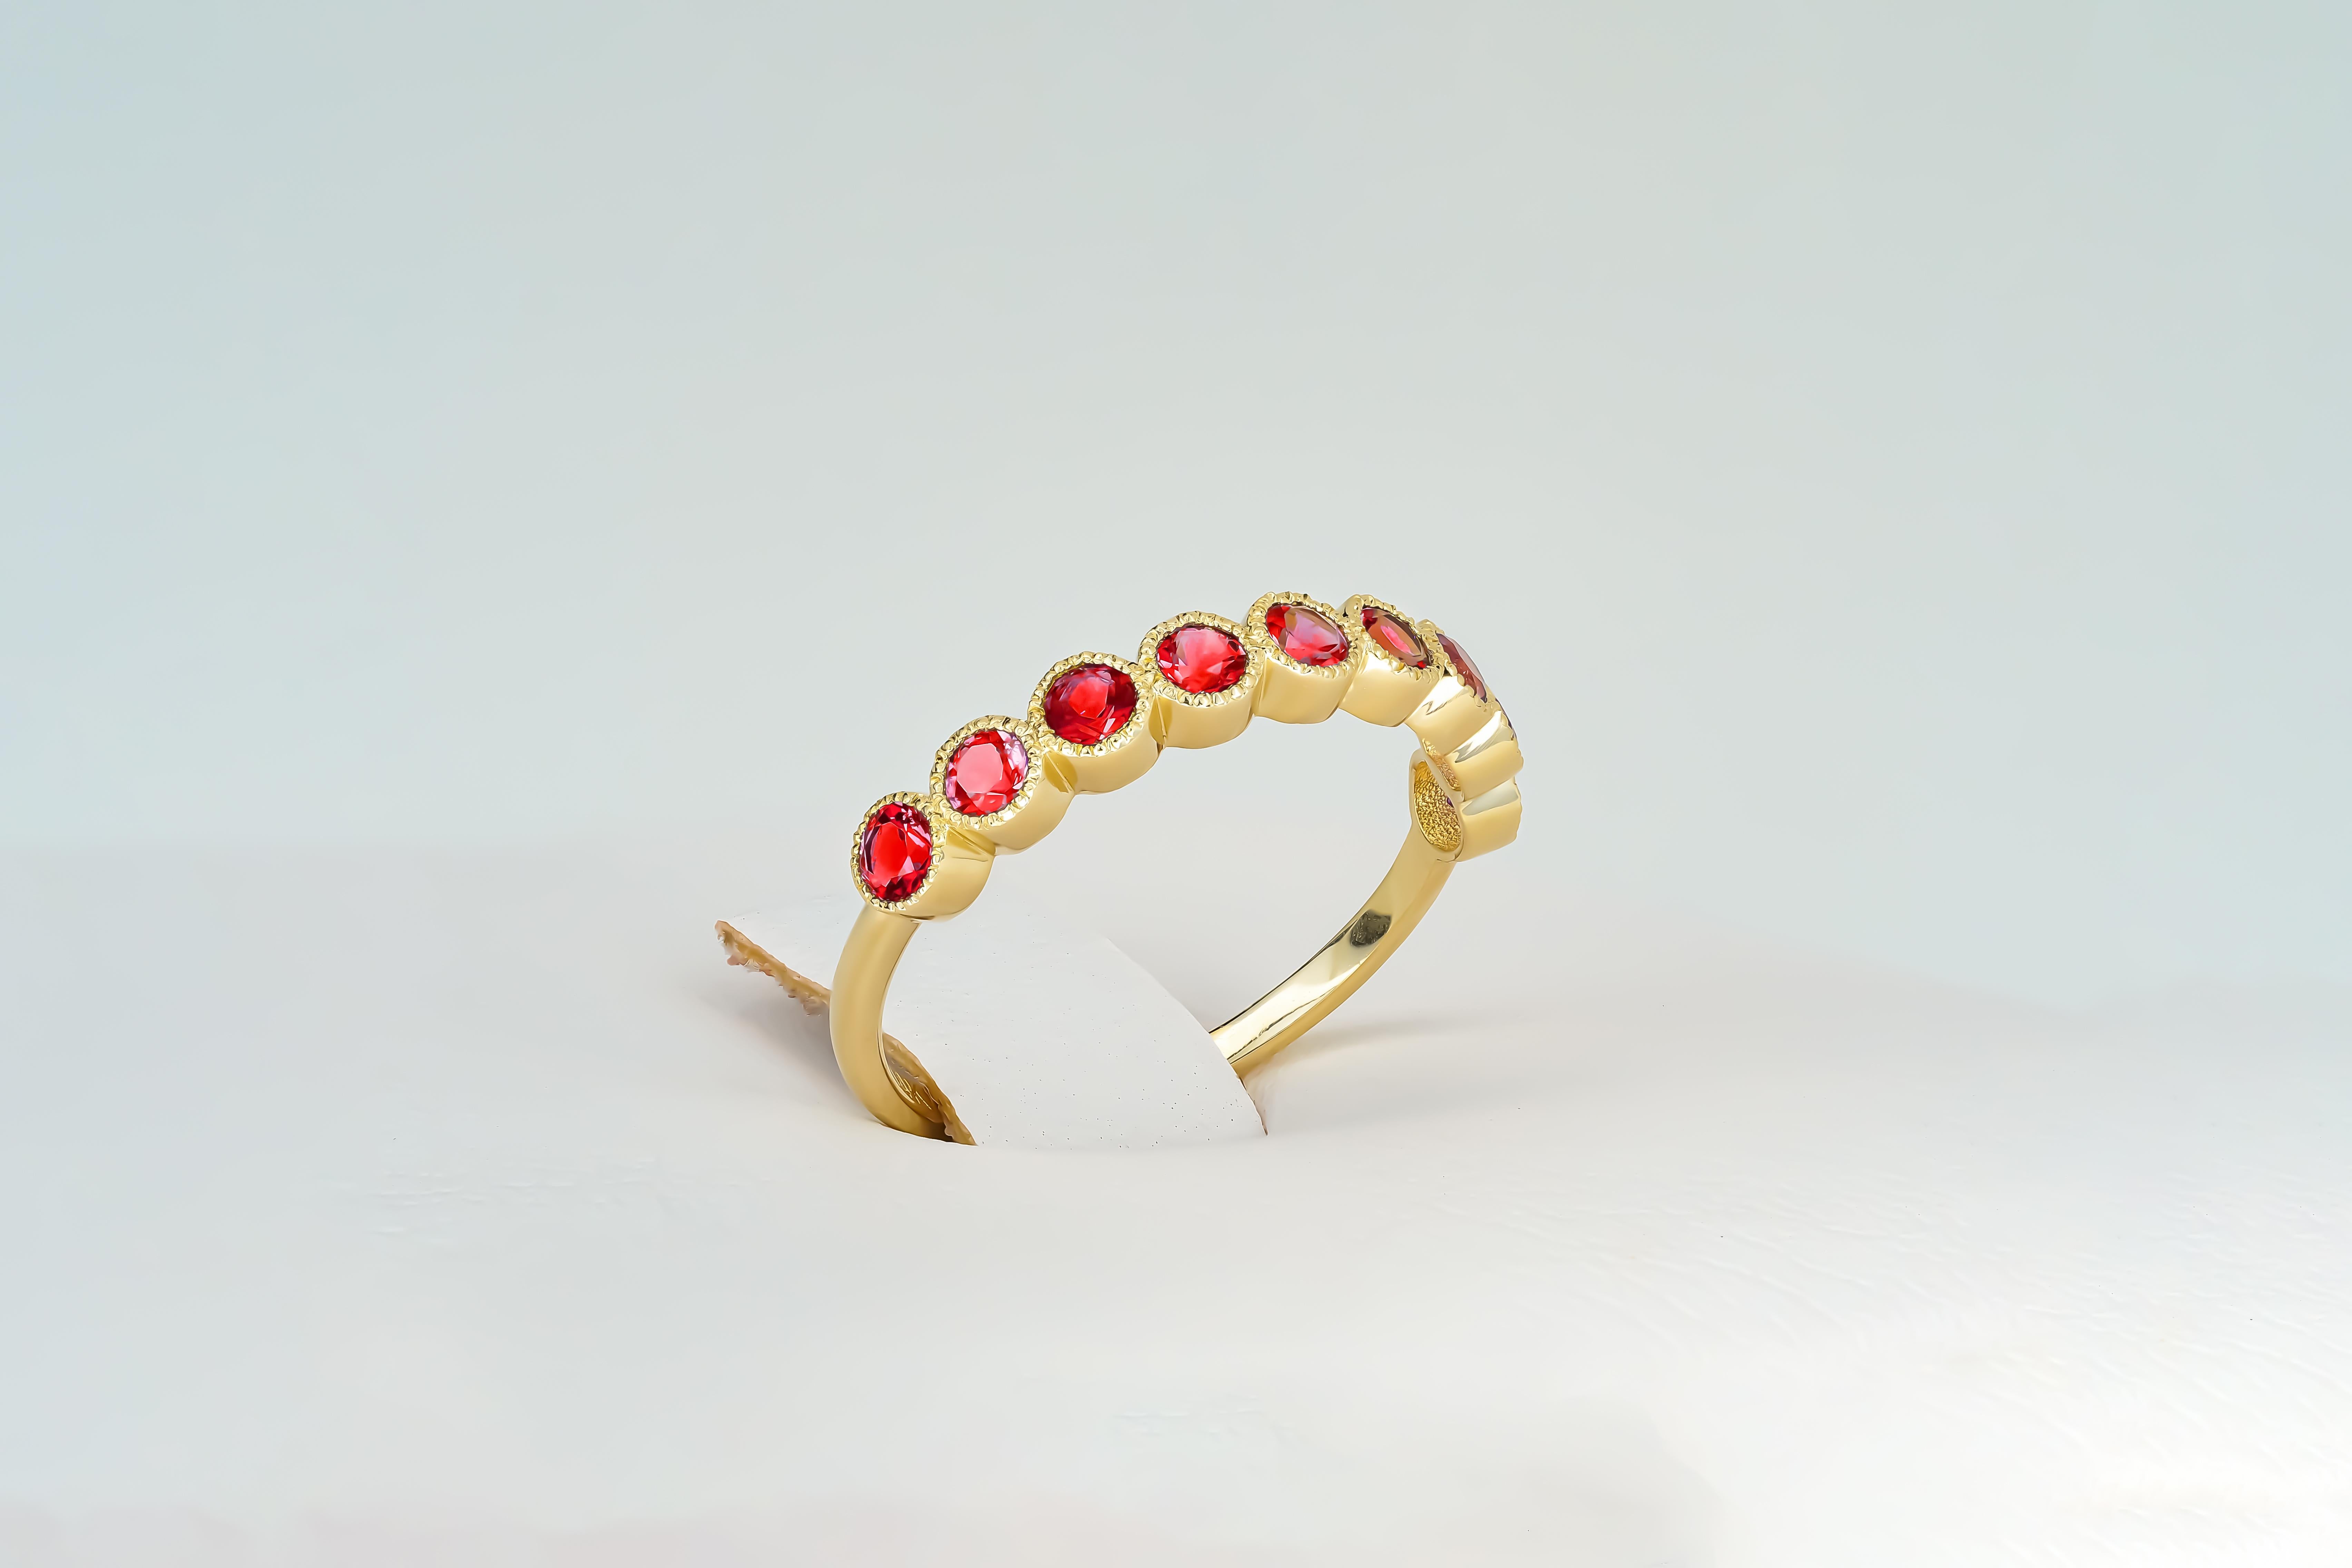 Red gem half eternity 14k gold ring.
Lab ruby semi eternity ring. Round red gemstone gold ring. 2.5 mm lab red ruby ring.

Metal: 14k gold
Weight: 1.8 gr depends from size

Gemstones:
Lab ruby, red color, round cut, 2.5 mm size. 

In our shop you